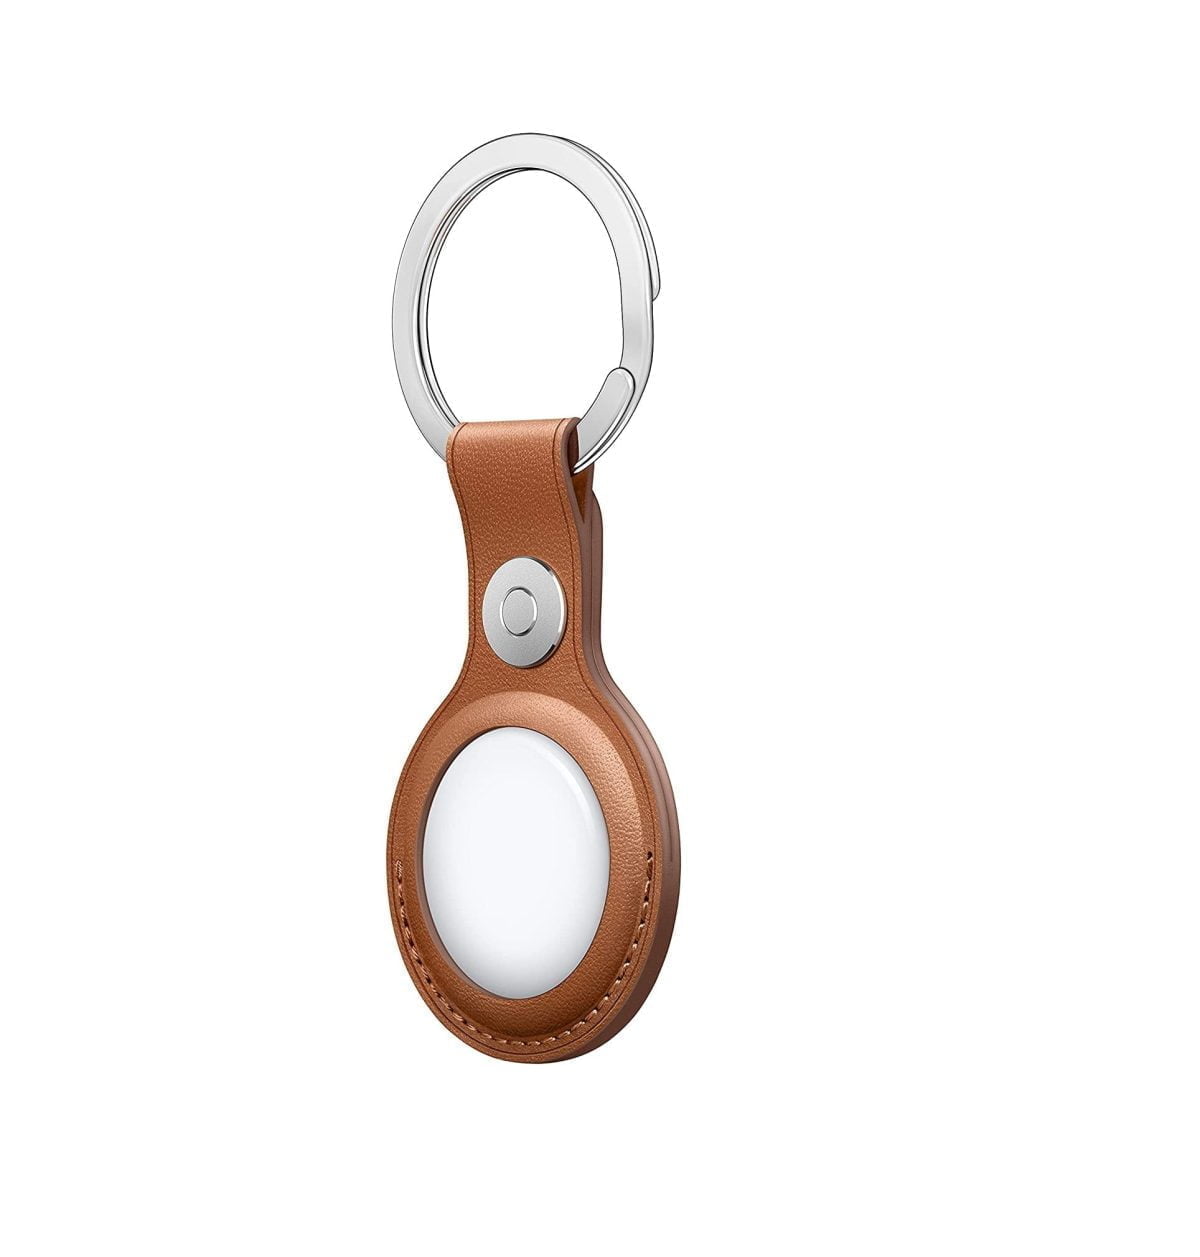 Apple &Lt;H1&Gt;Apple Airtag Leather Key Ring - Saddle Brown&Lt;/H1&Gt; &Lt;Ul Class=&Quot;A-Unordered-List A-Vertical A-Spacing-Mini&Quot;&Gt; &Lt;Li&Gt;&Lt;Span Class=&Quot;A-List-Item&Quot;&Gt;The Leather Key Ring Is Thoughtfully Crafted From The Finest Materials.&Lt;/Span&Gt;&Lt;/Li&Gt; &Lt;Li&Gt;&Lt;Span Class=&Quot;A-List-Item&Quot;&Gt;The Stainless Steel Is As Striking As It Is Strong, While The European Leather Is Specially Tanned And Soft To The Touch.&Lt;/Span&Gt;&Lt;/Li&Gt; &Lt;Li&Gt;&Lt;Span Class=&Quot;A-List-Item&Quot;&Gt;And It Fits Snugly Over Your Airtag, So You Never Have To Worry About It Falling Out.&Lt;/Span&Gt;&Lt;/Li&Gt; &Lt;/Ul&Gt; &Lt;Em&Gt;&Lt;Strong&Gt;Note: Air Tag Not Included&Lt;/Strong&Gt;&Lt;/Em&Gt; Apple Airtag Apple Airtag Leather Key Ring - Saddle Brown